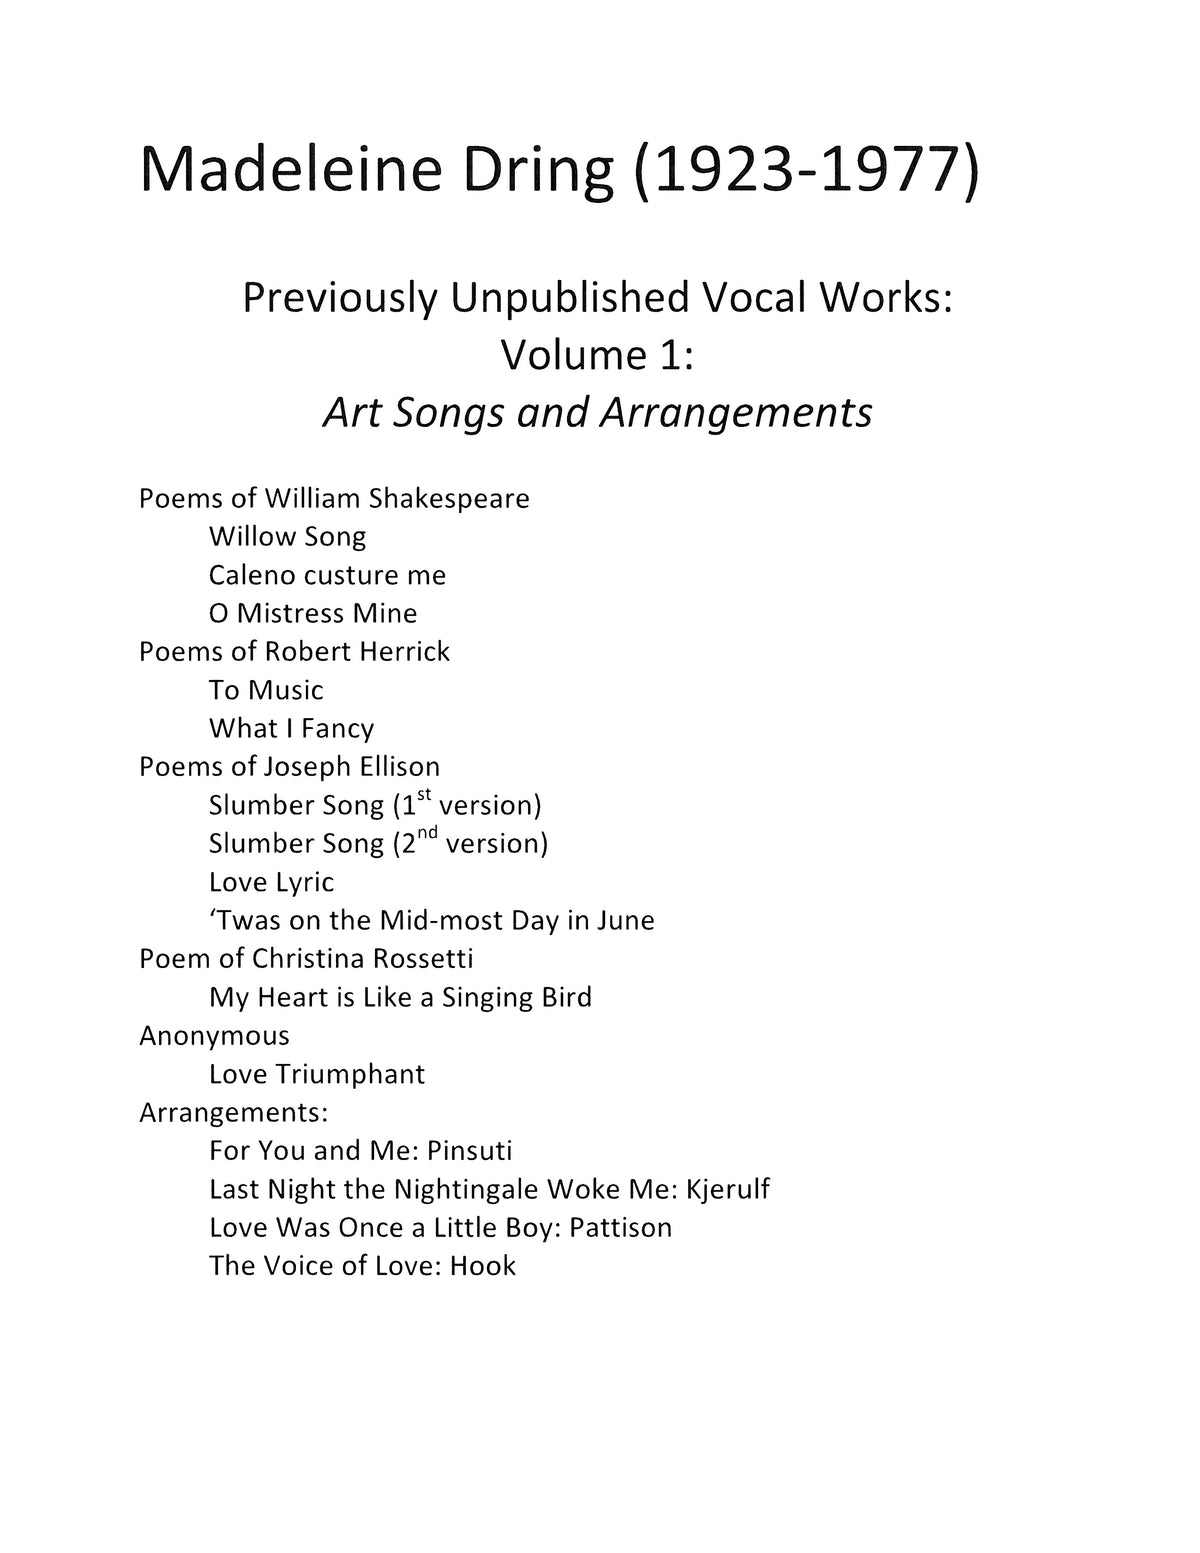 Dring Art Songs and Arrangements Volume 1 - Previously Unpublished Vocal Works